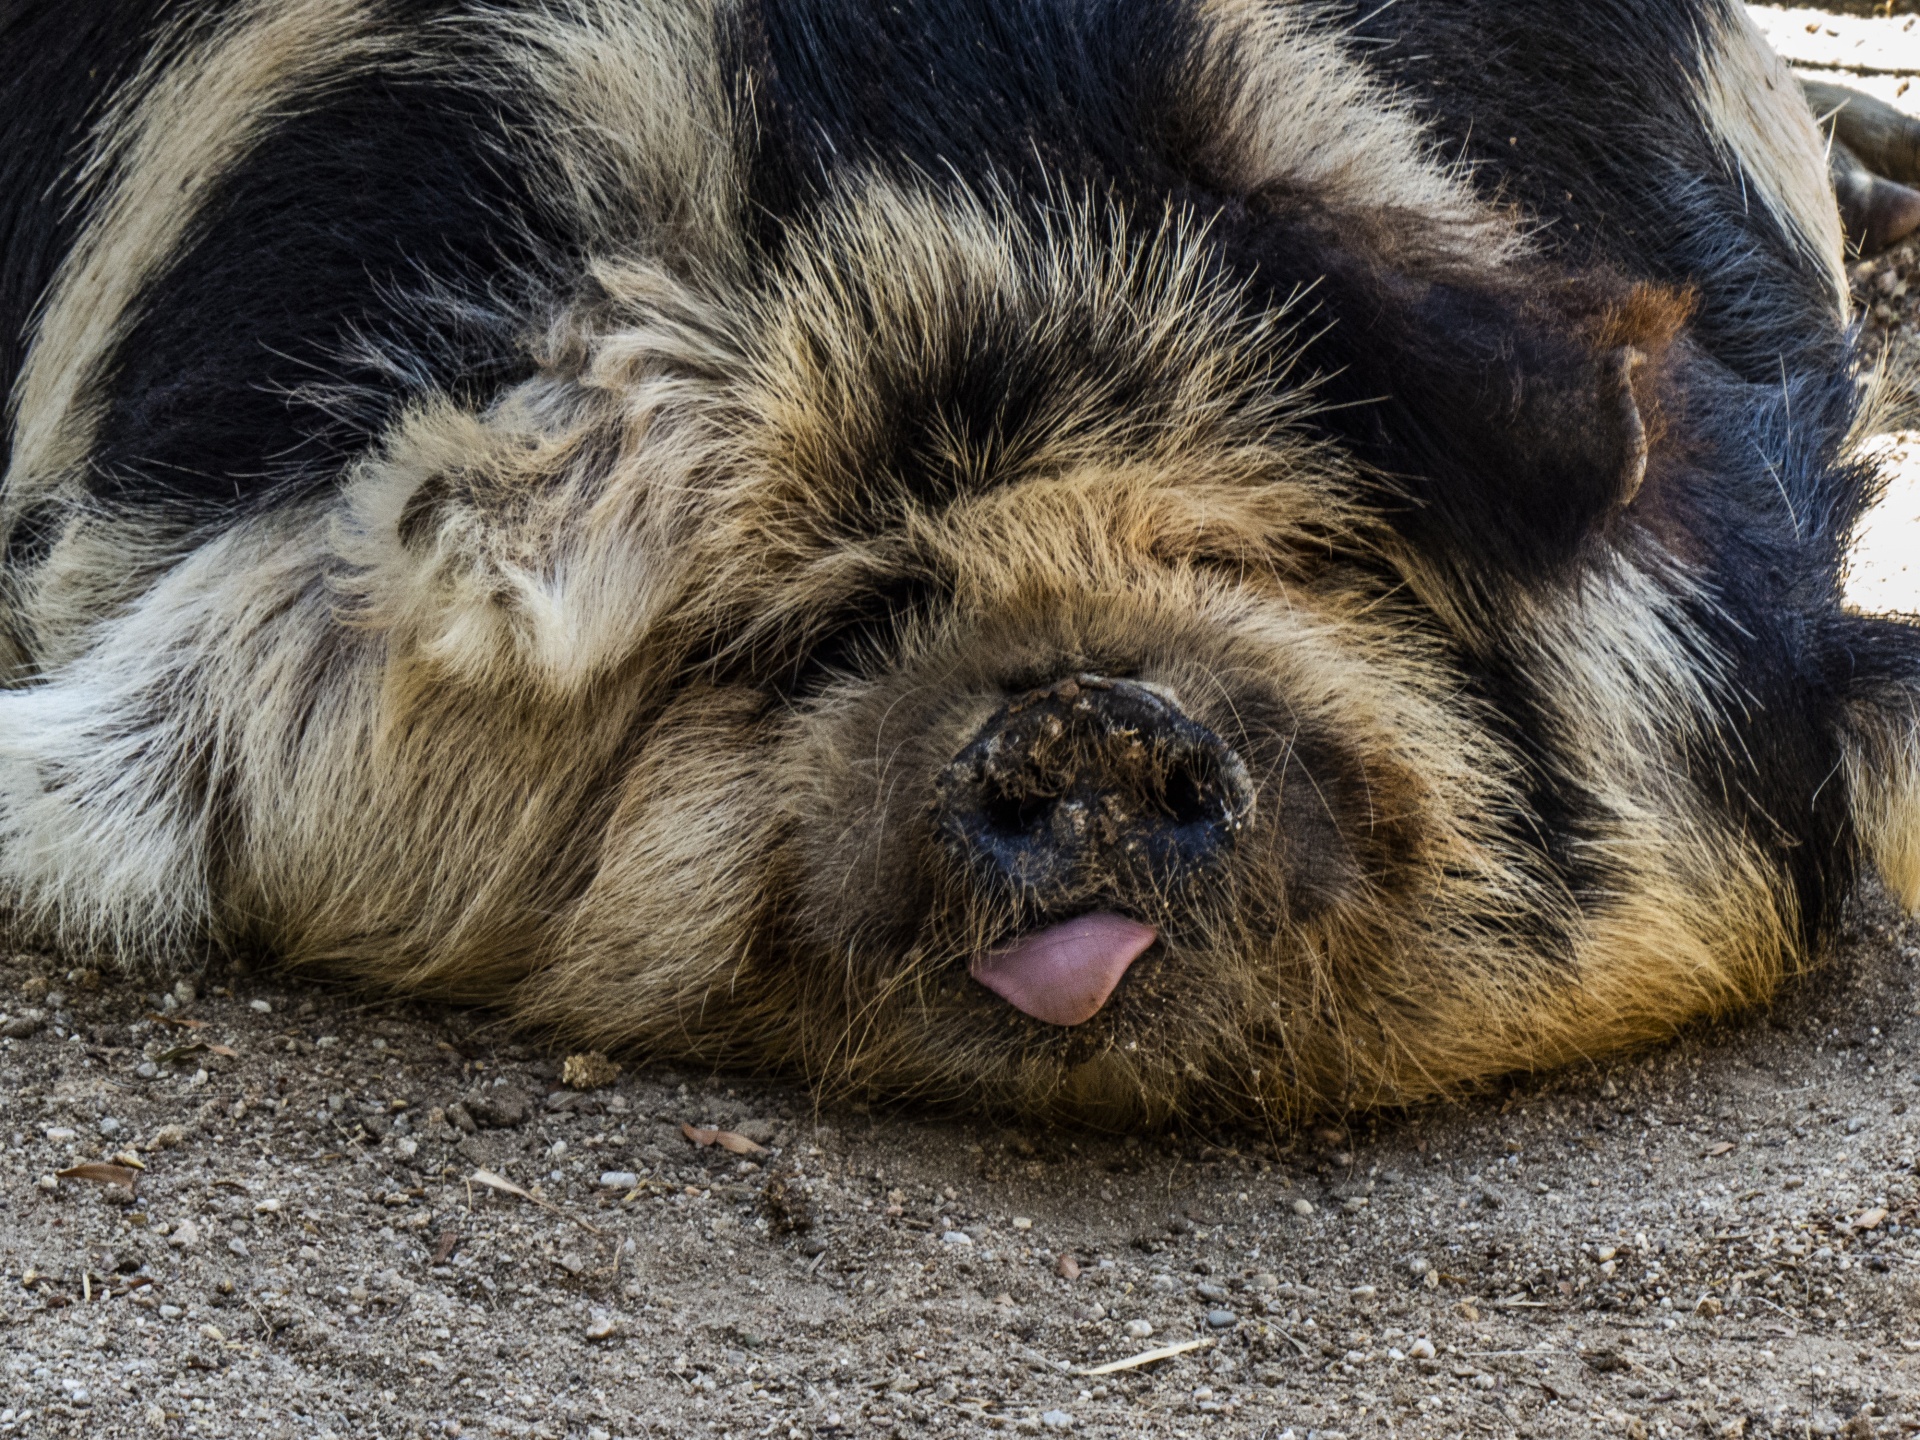 KuneKune pig, hairy and laying down in the dirt with its tongue sticking out